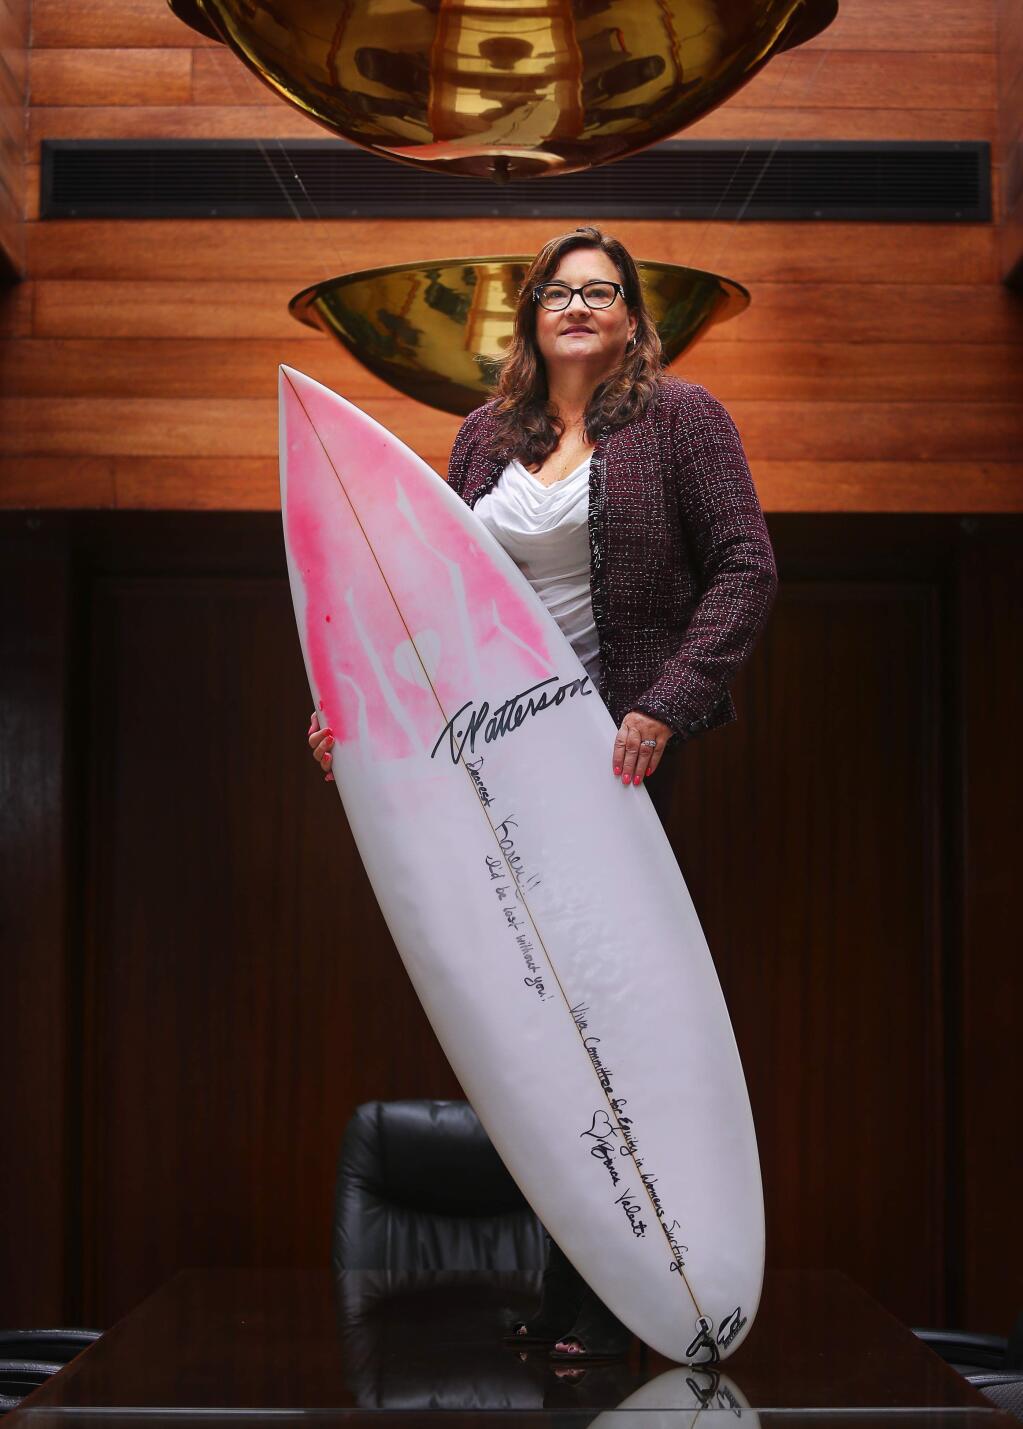 Attorney and counselor at law Karen Tynan represented a group of professional big-wave surfers that won a court decision that requires the annual Mavericks big-wave surfing contest to award equal pay for both female and male surfers. Surfer Bianca Valenti gave her an autographed board in appreciation.(Christopher Chung/ The Press Democrat)